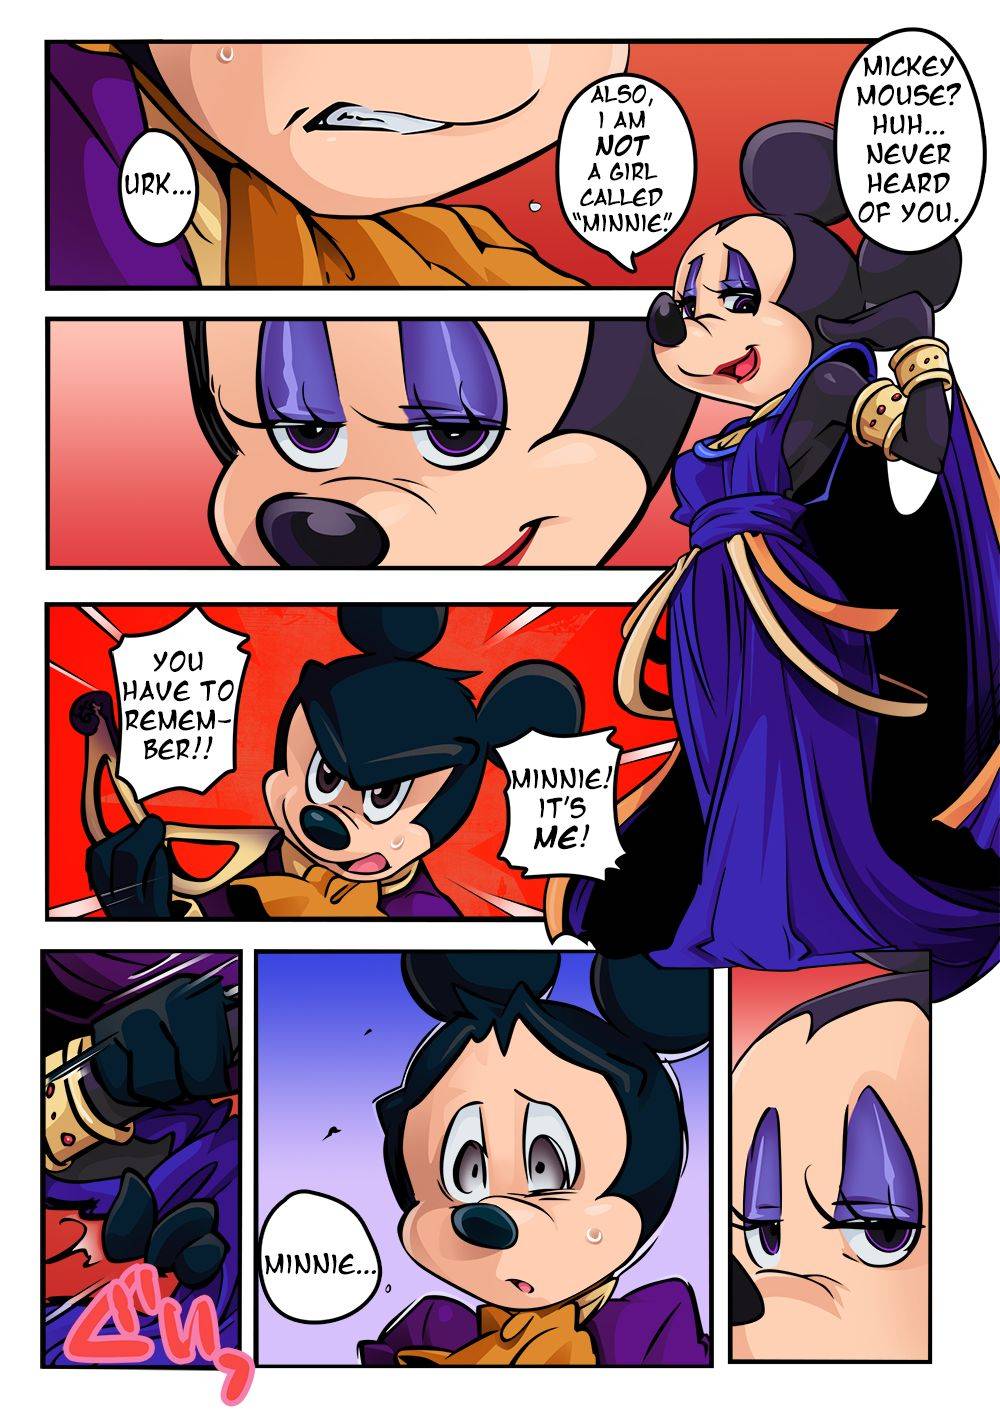 Mickey and The Queen - nearphotison page 1